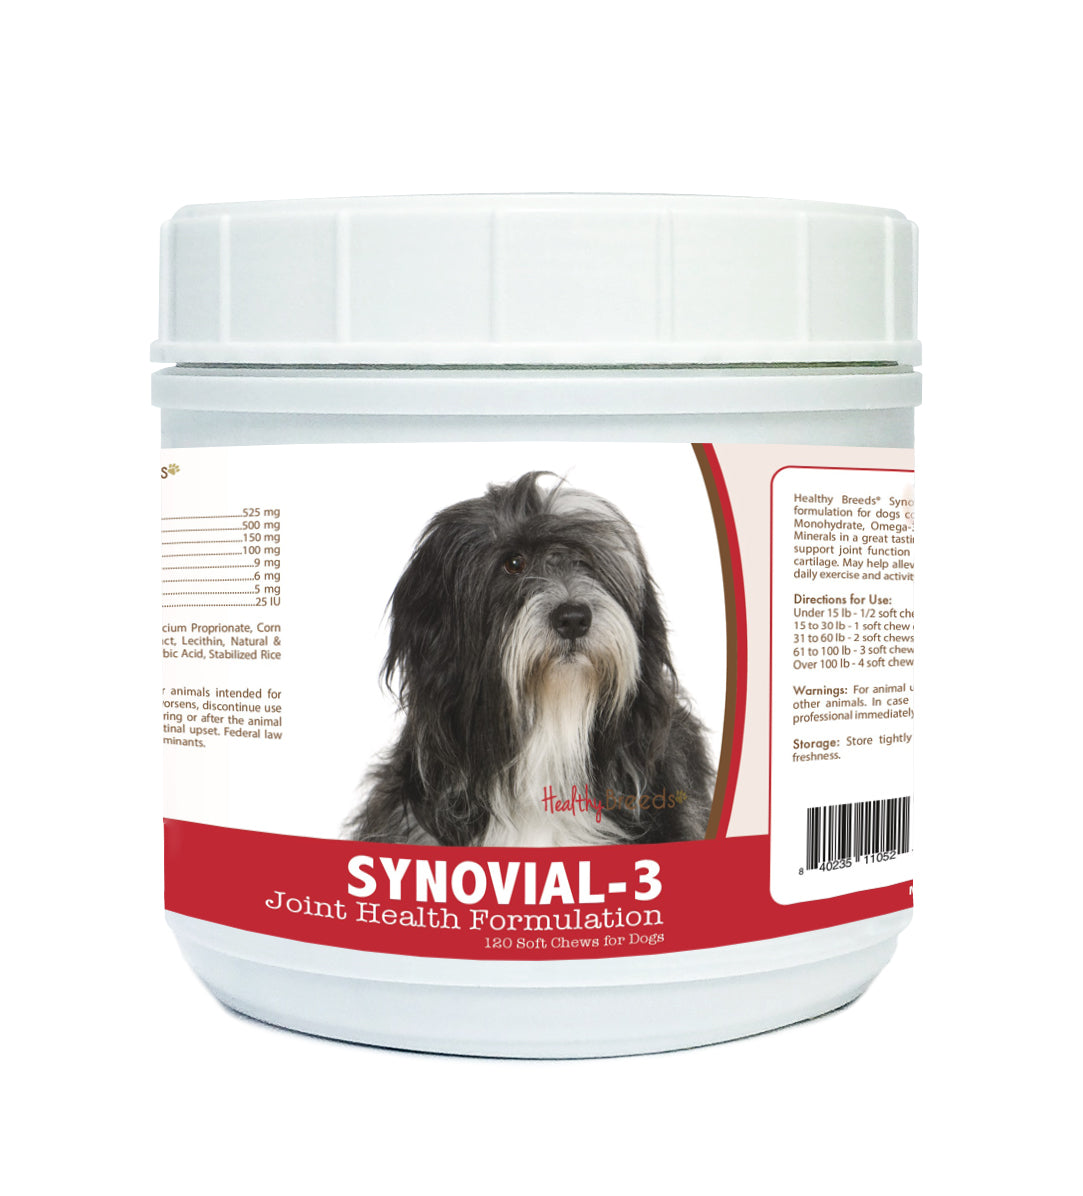 Lhasa Apso Synovial-3 Joint Health Formulation Soft Chews 120 Count